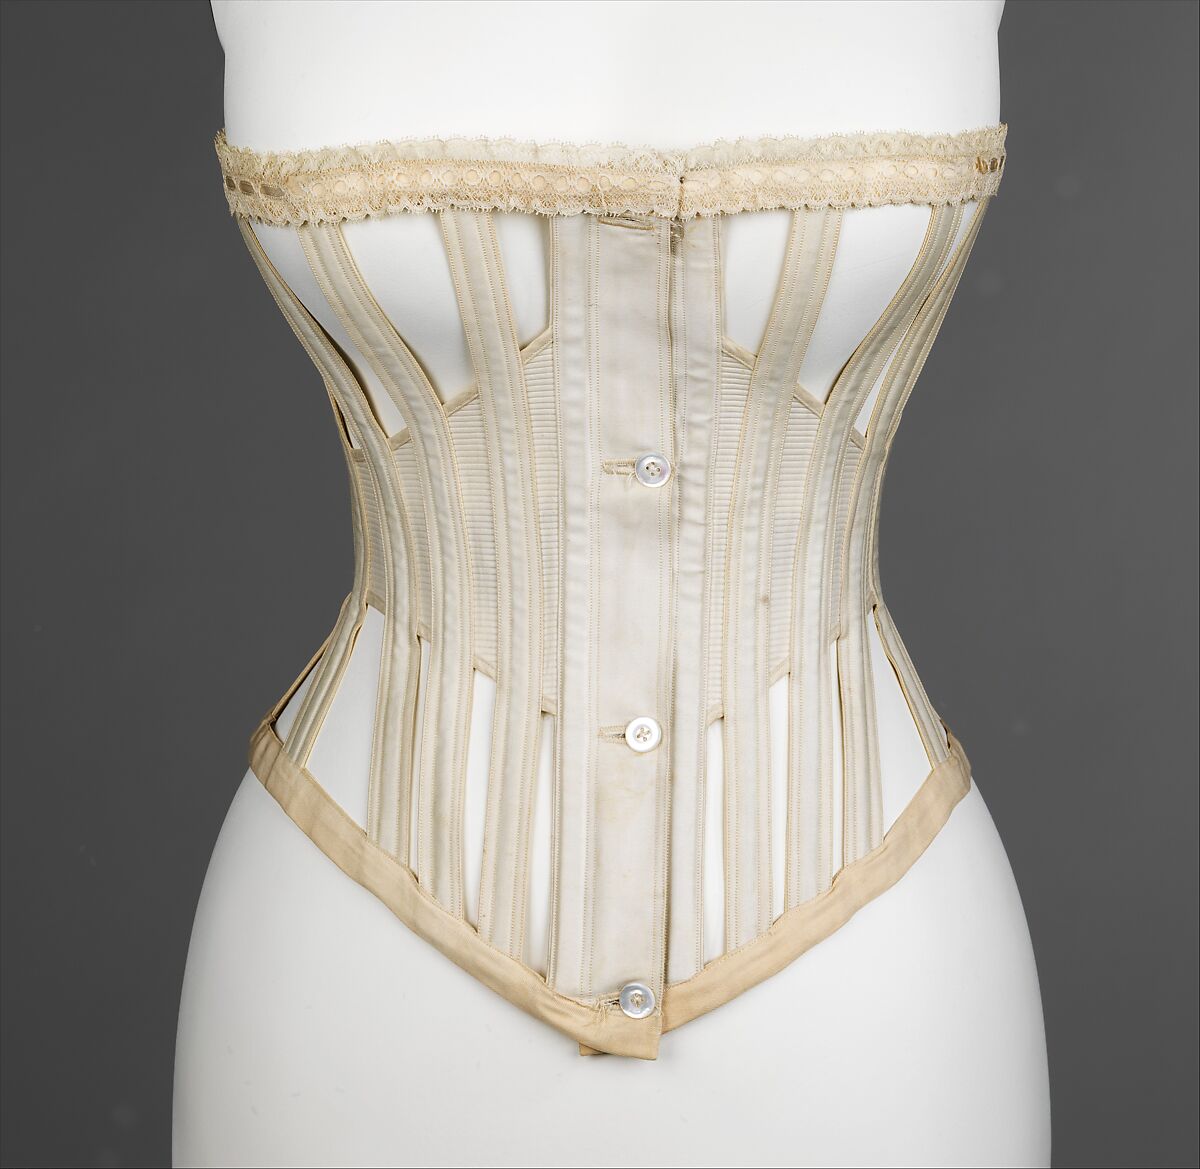 Attributed to Royal Worcester Corset Company, Corset